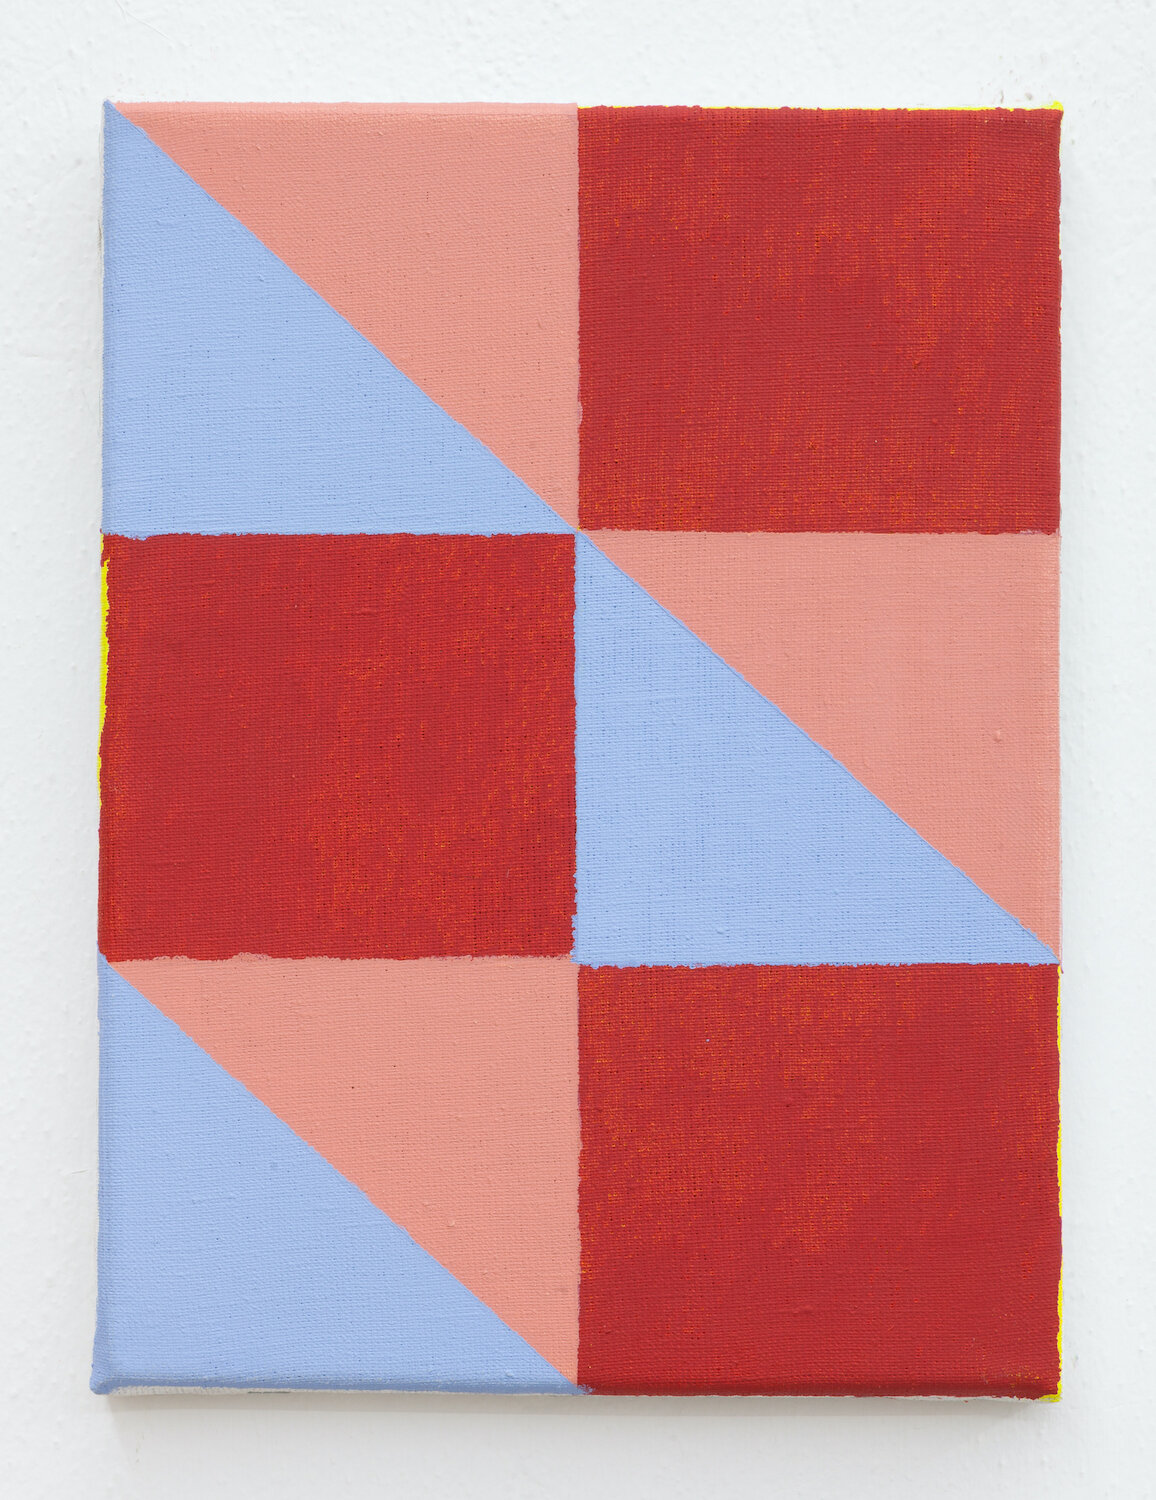  Joshua Abelow,  Untitled (Abstraction “HMM”) , 2019, Oil on linen, 12 x 9 inches 